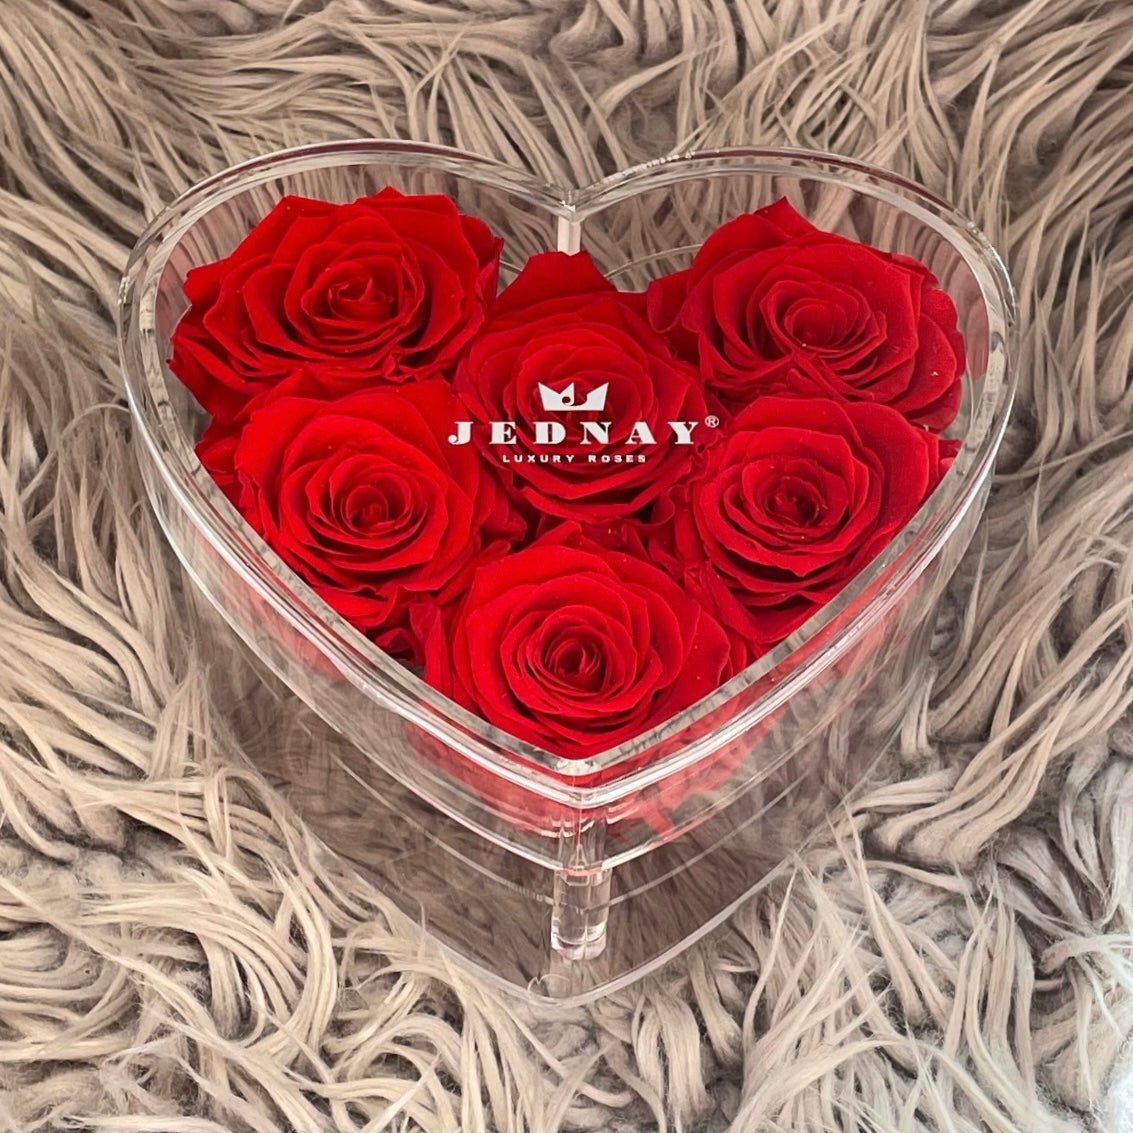 Nothing Says 'I Love You' Like Infinity Roses! - Jednay Roses